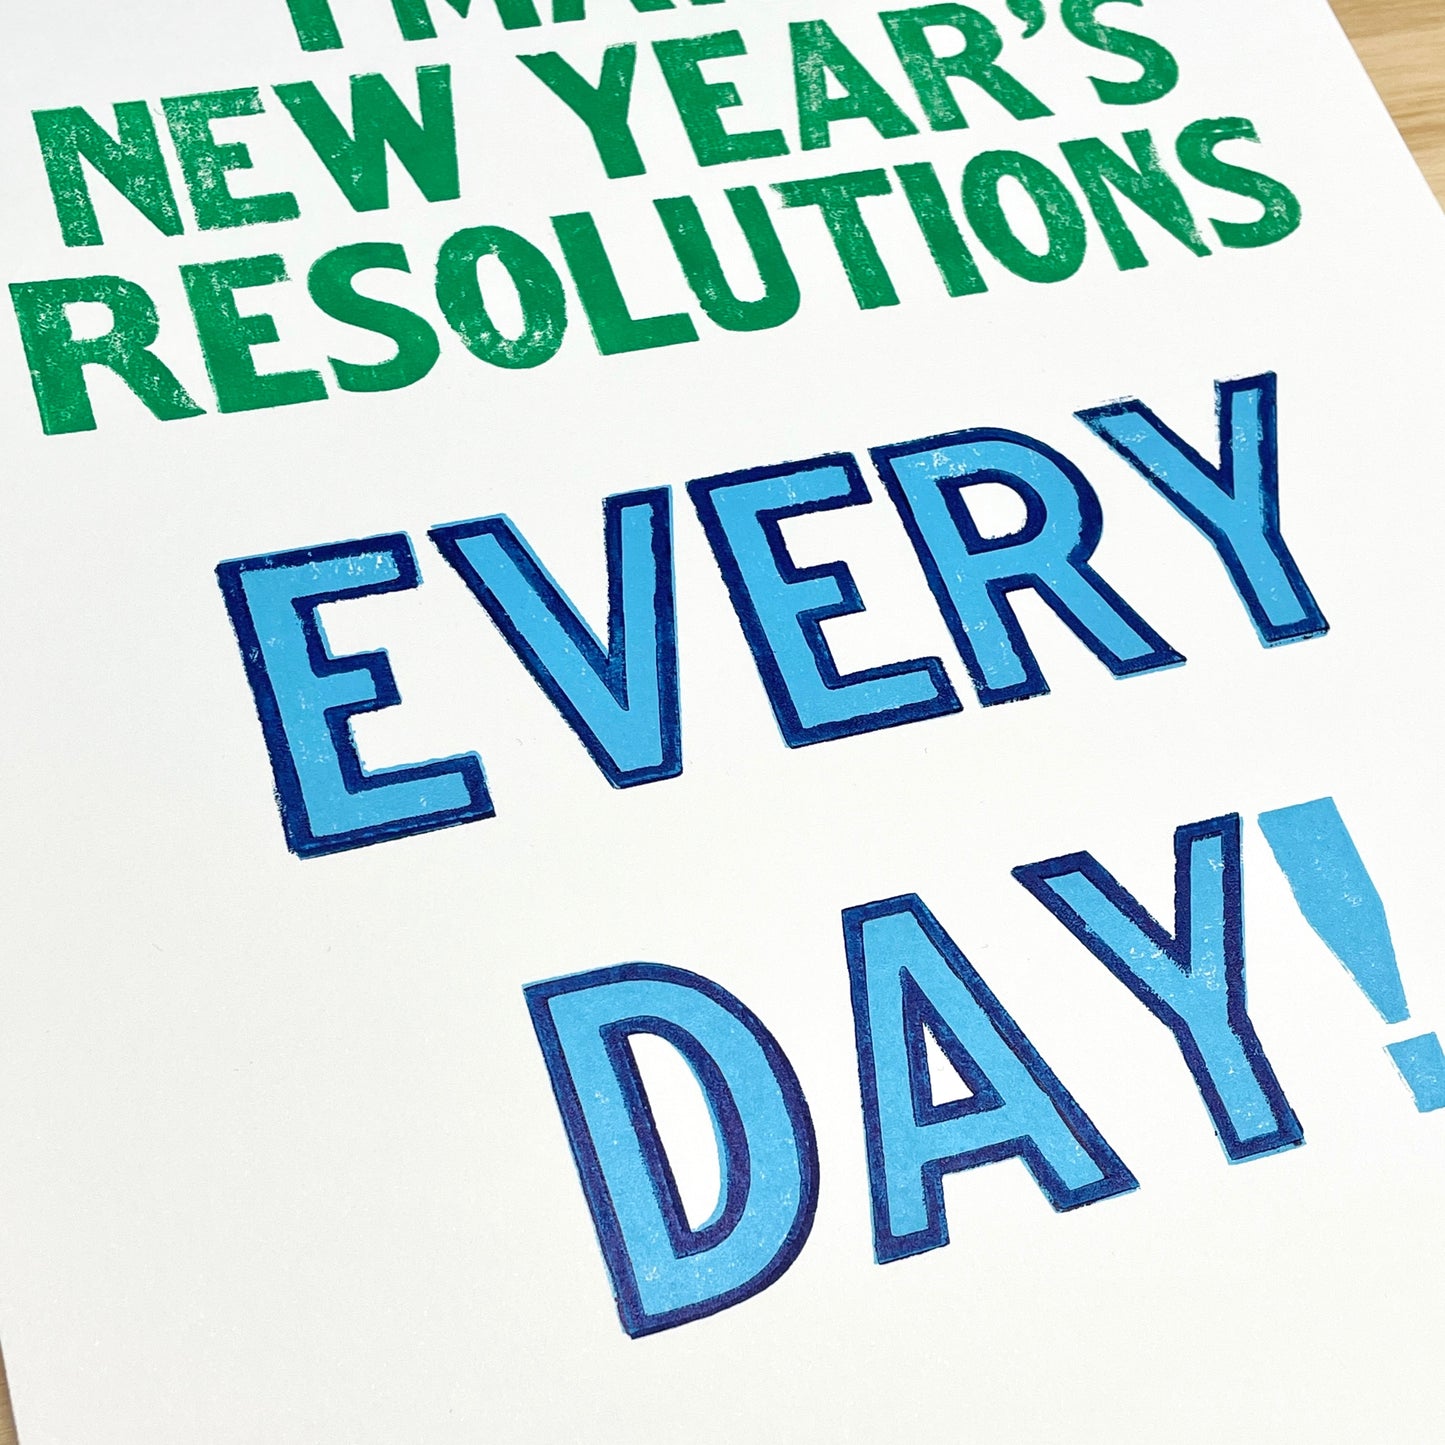 I Make New Year's Resolutions EVERY DAY! Wood Type Letterpress Quote (9x12")